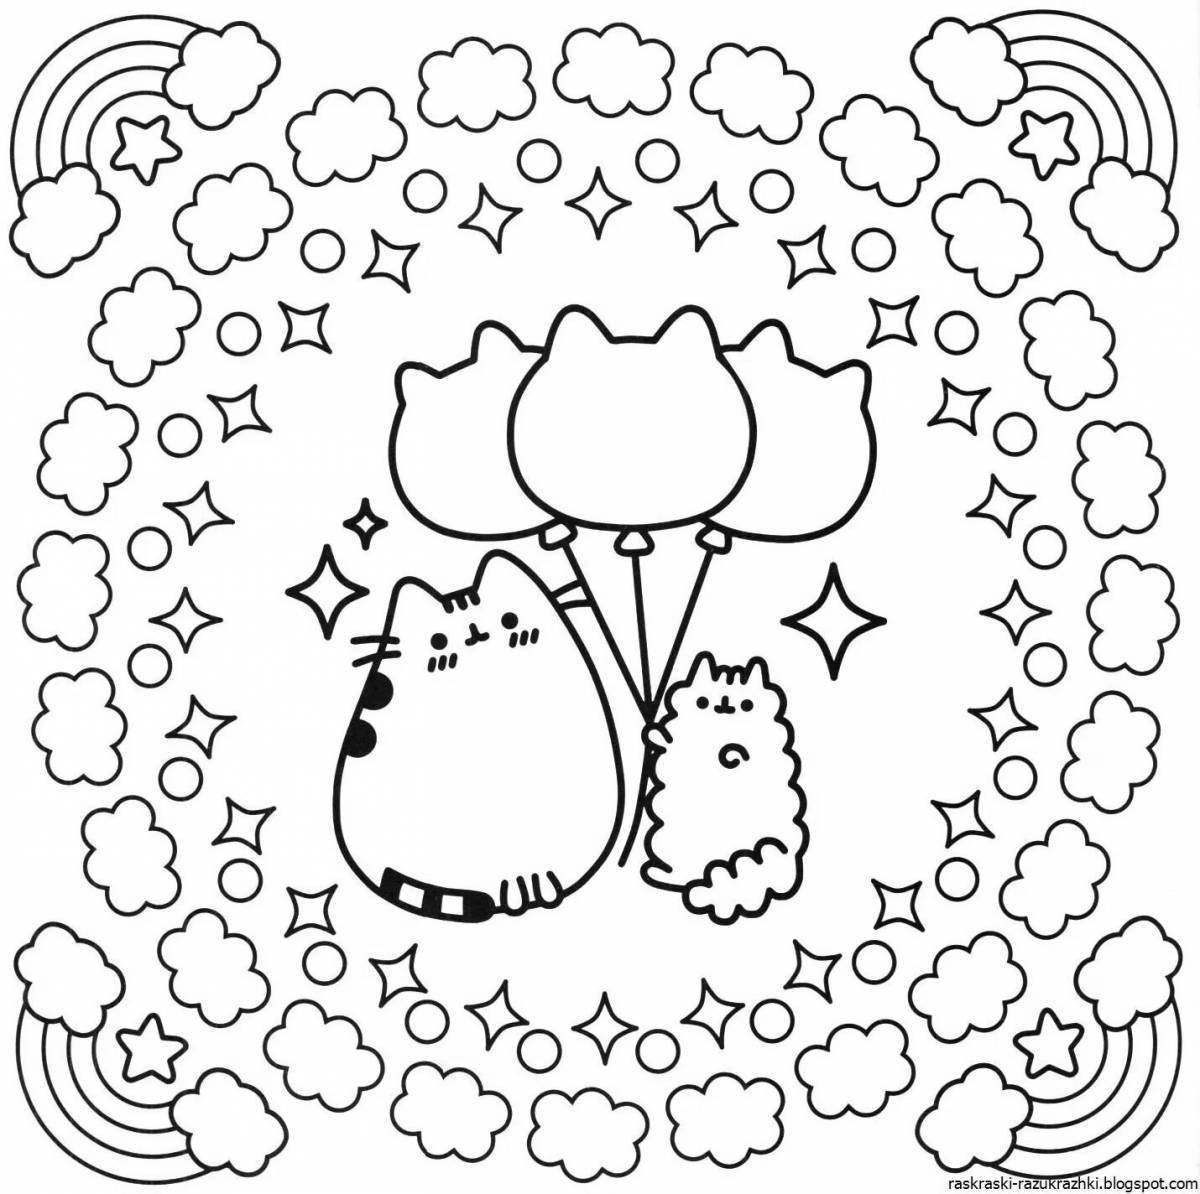 Radiant pusheen coloring page